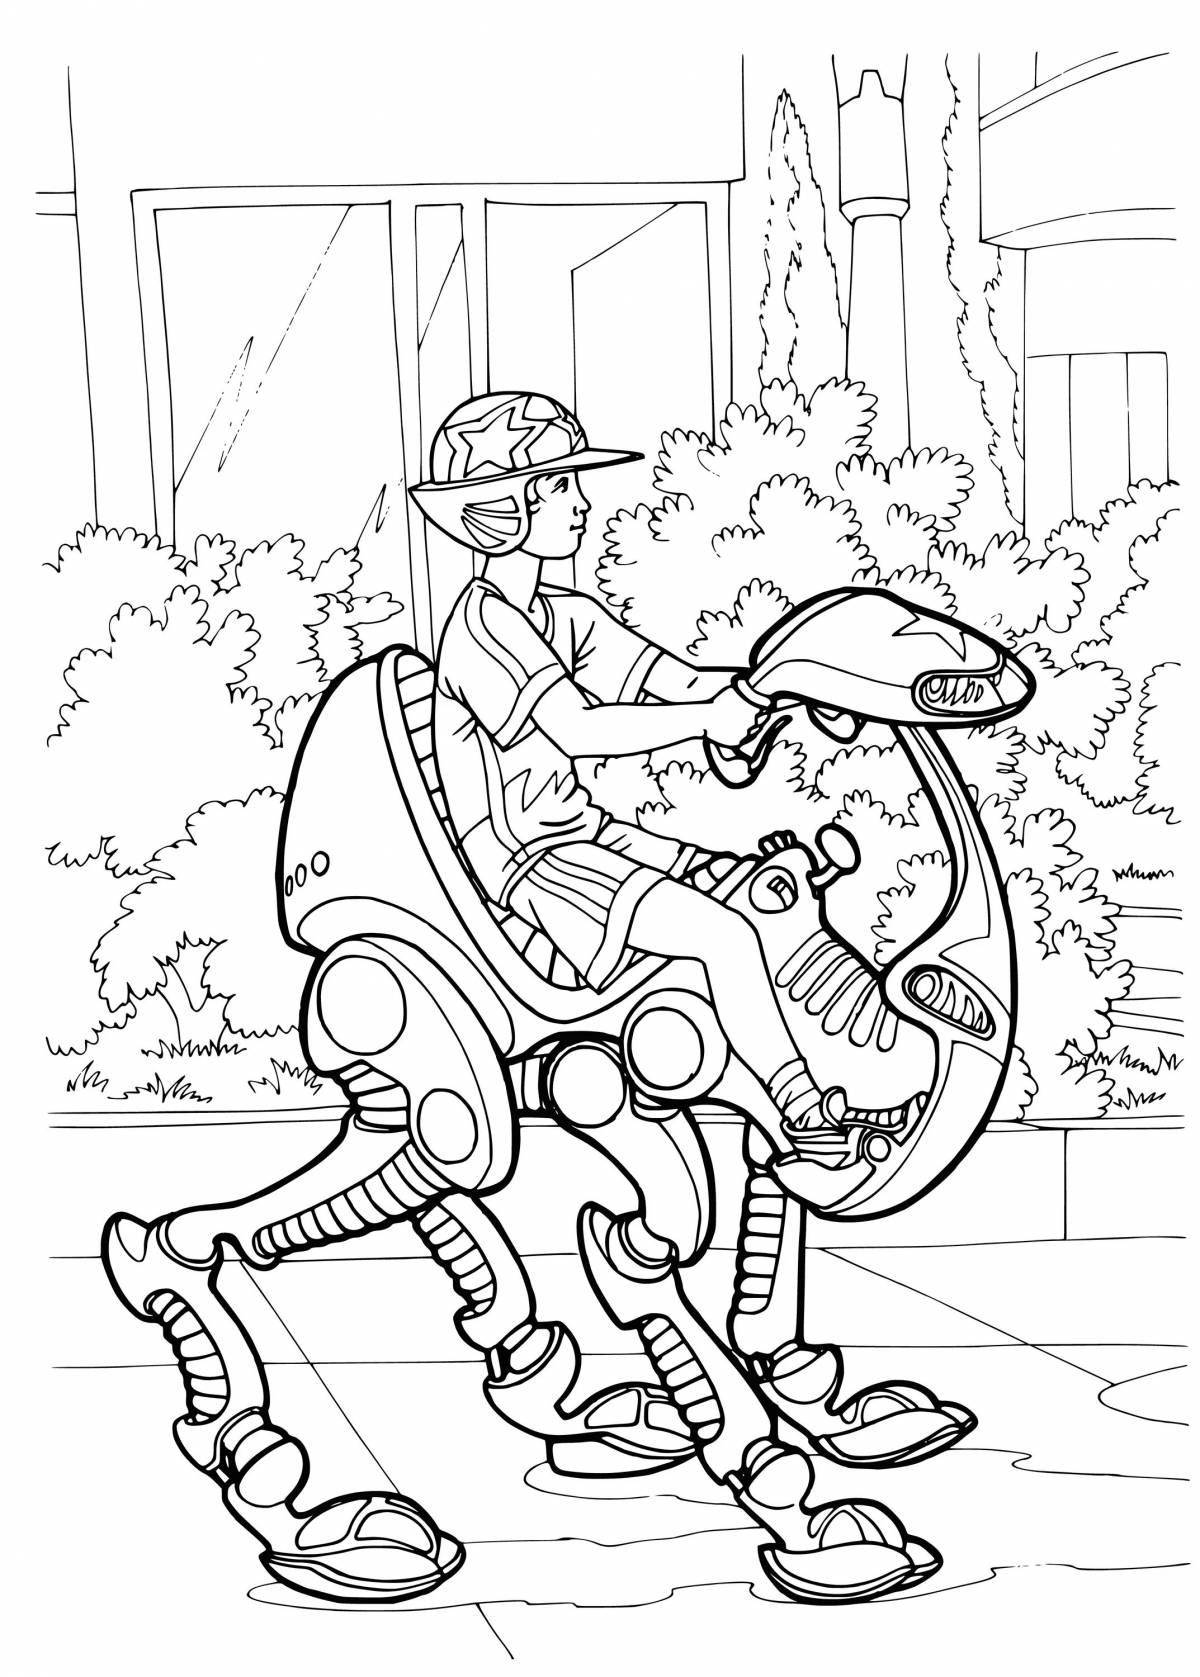 Future Inspiring Coloring Page